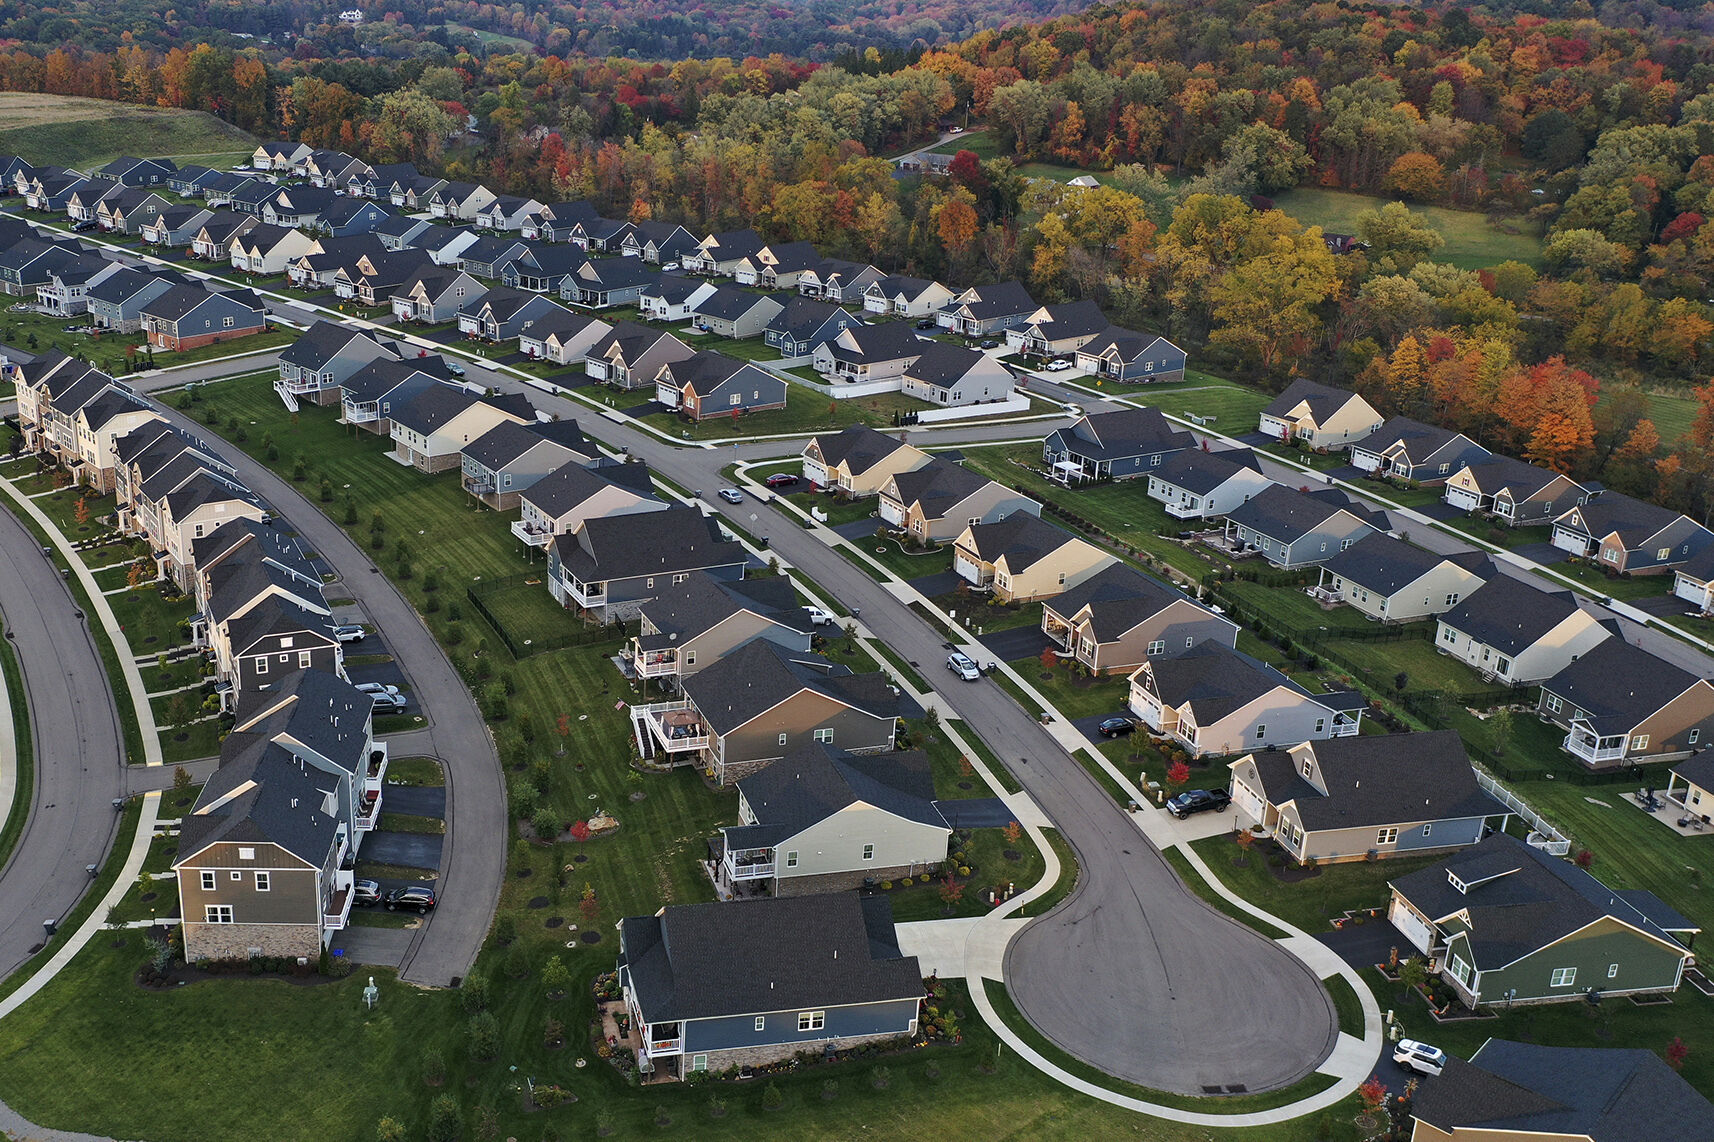 <p>FILE - This is a new housing development in Middlesex Township, Pa., on Oct. 12, 2022. Among the roughly 63% of U.S. homes with a mortgage, average homeowner equity per borrower was $274,070 in the first quarter of 2023, down 1.9% from the same quarter last year, according to real estate data tracker CoreLogic. (AP Photo/Gene J. Puskar, File)</p>   PHOTO CREDIT: Gene J. Puskar 